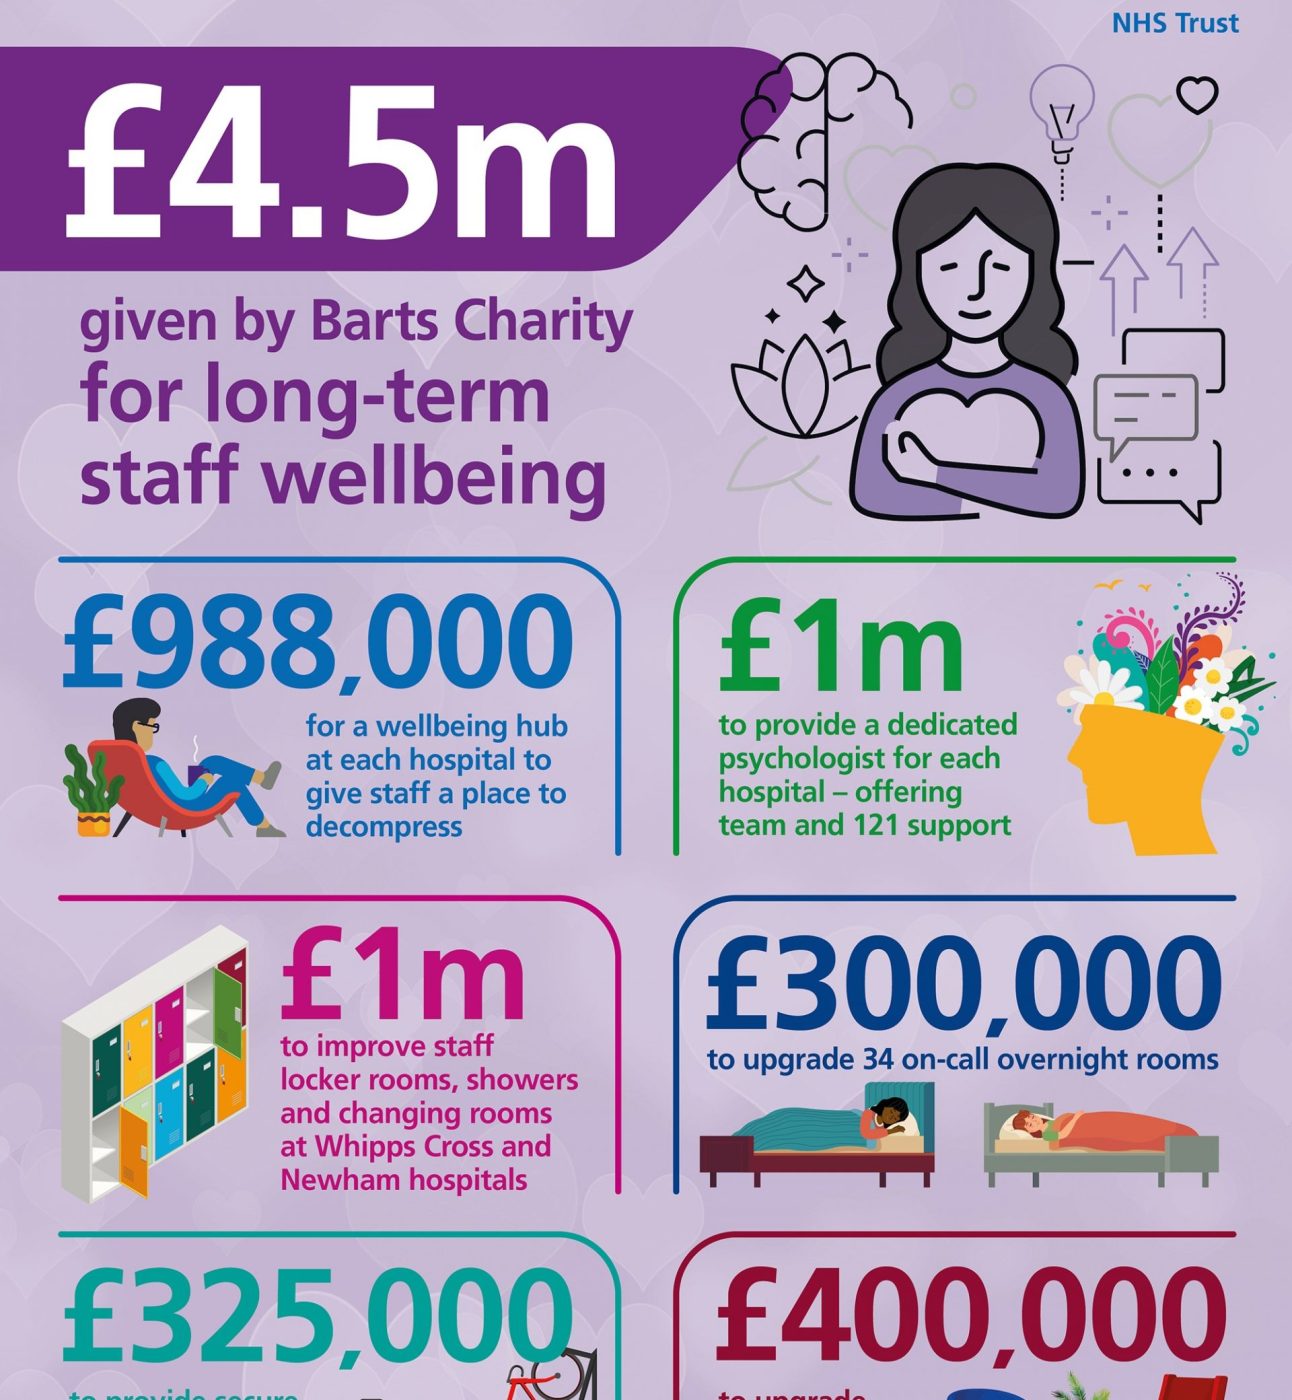 Infographic showing the impact of our £4.5m funding